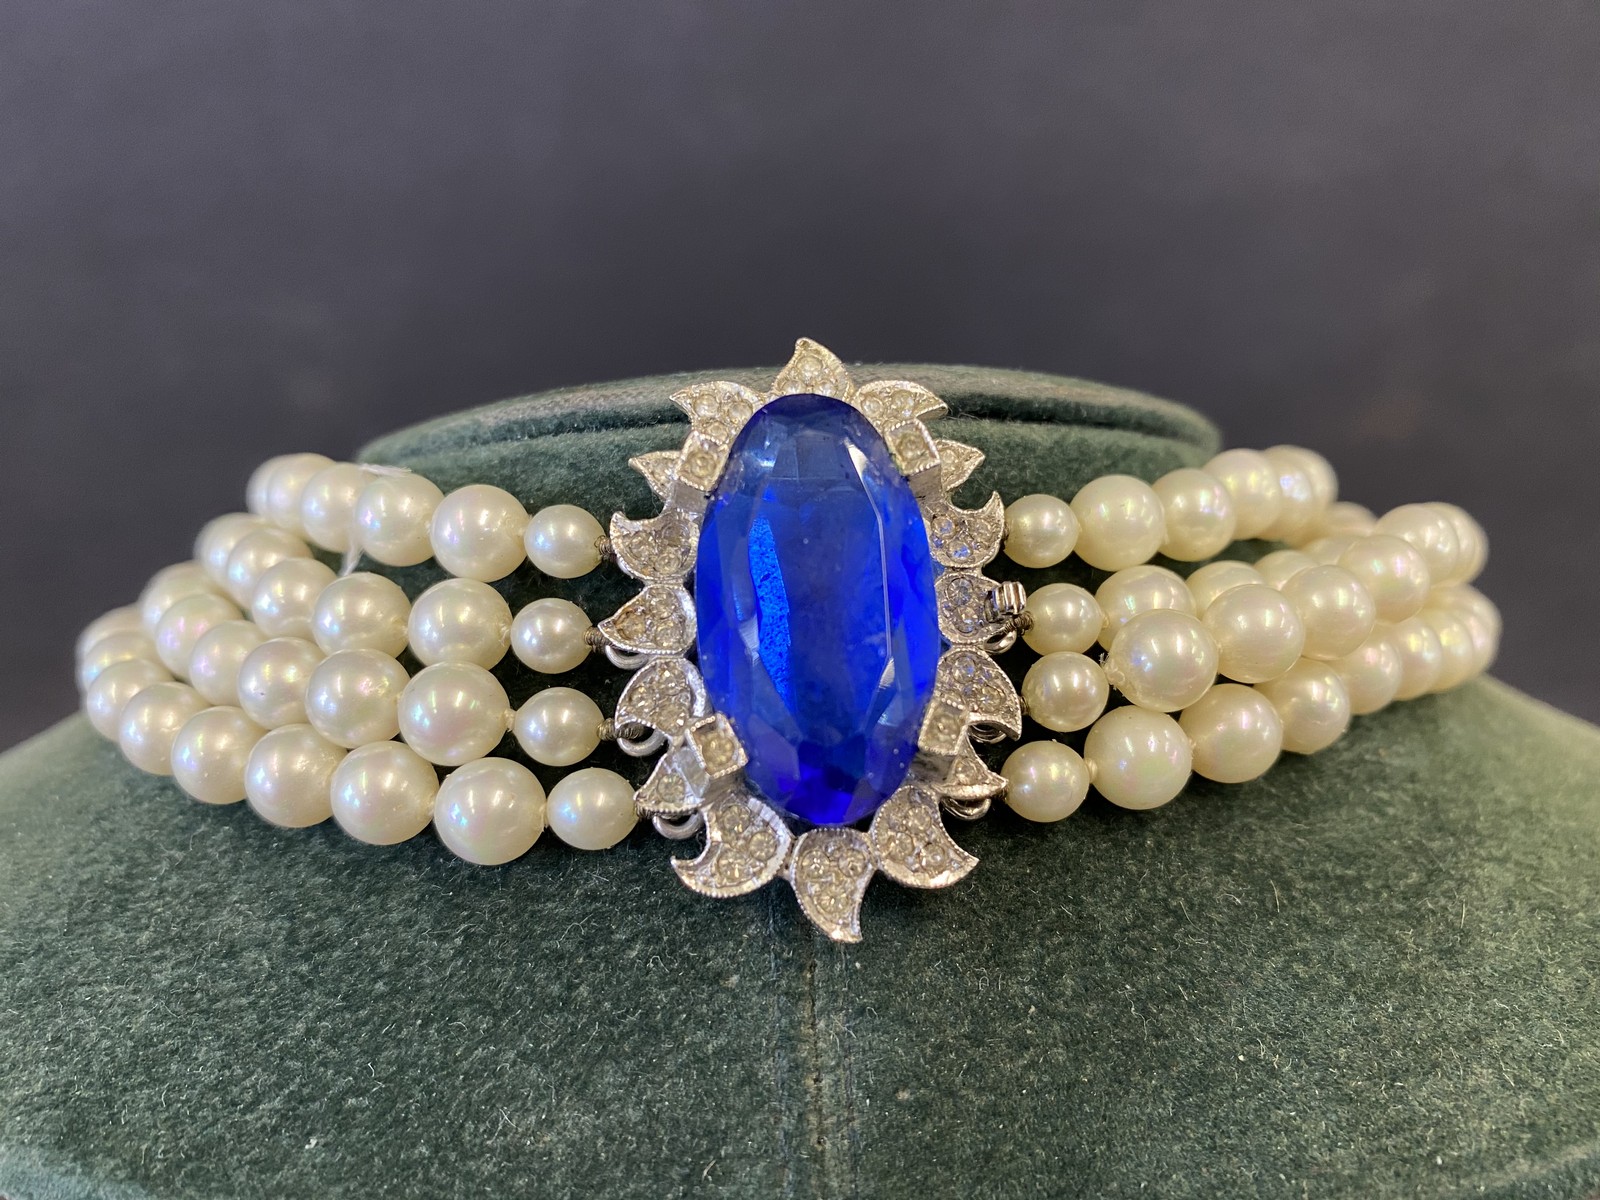 An impressive four string pearl choker with central blue stone surrounded by paste. - Image 2 of 2